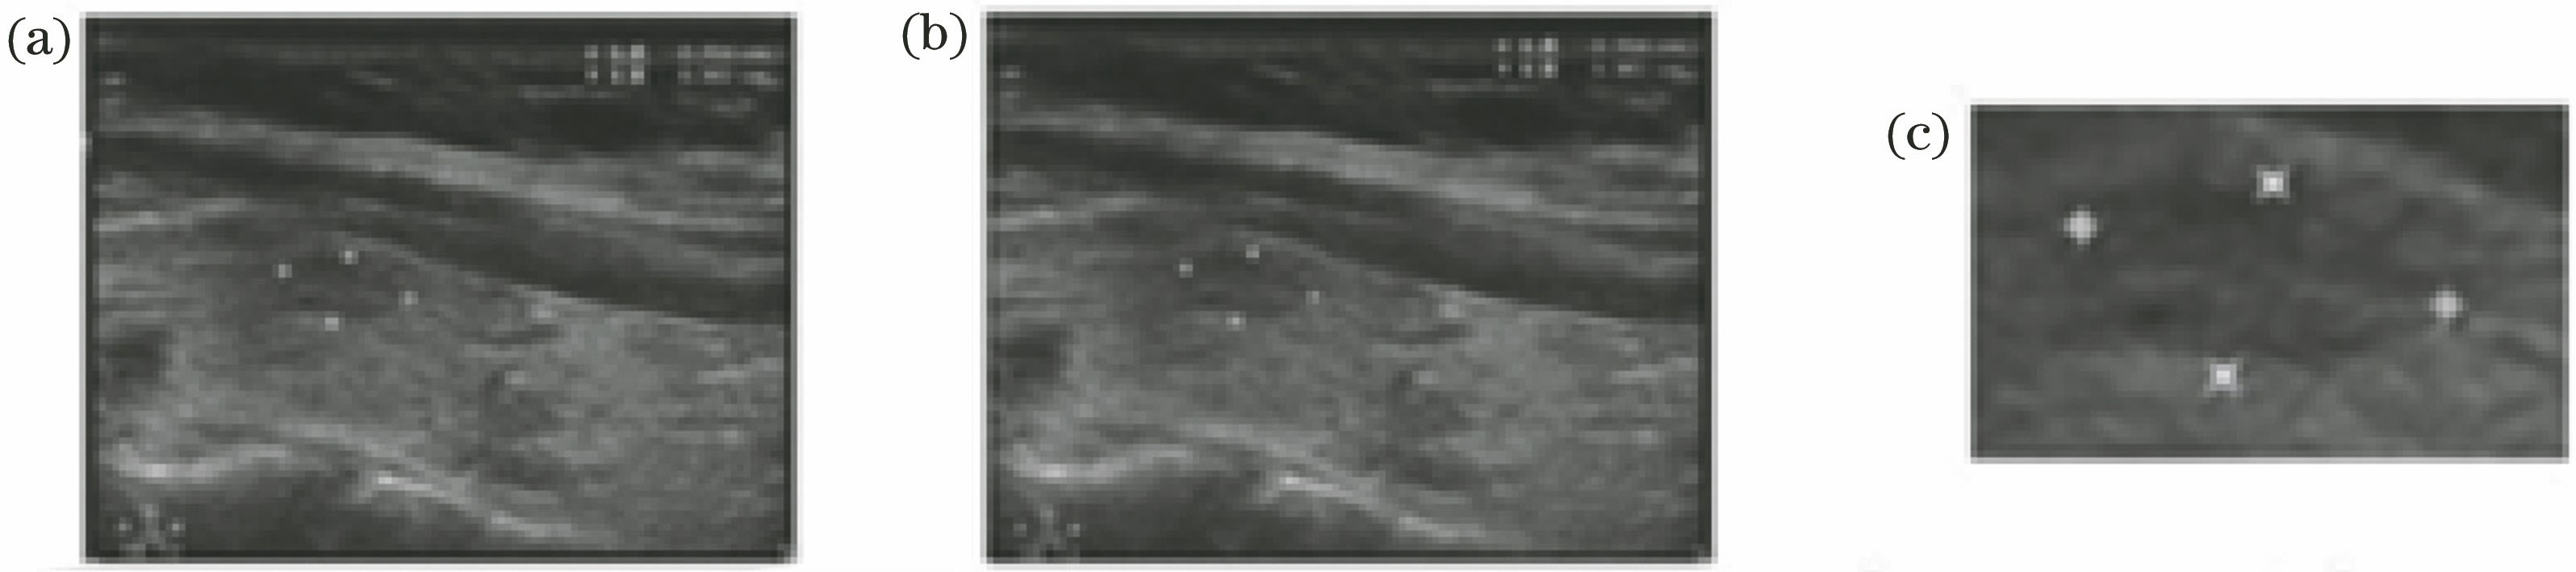 Ultrasound images of thyroid. (a) Original image; (b) noise-removal image; (c) region of interest